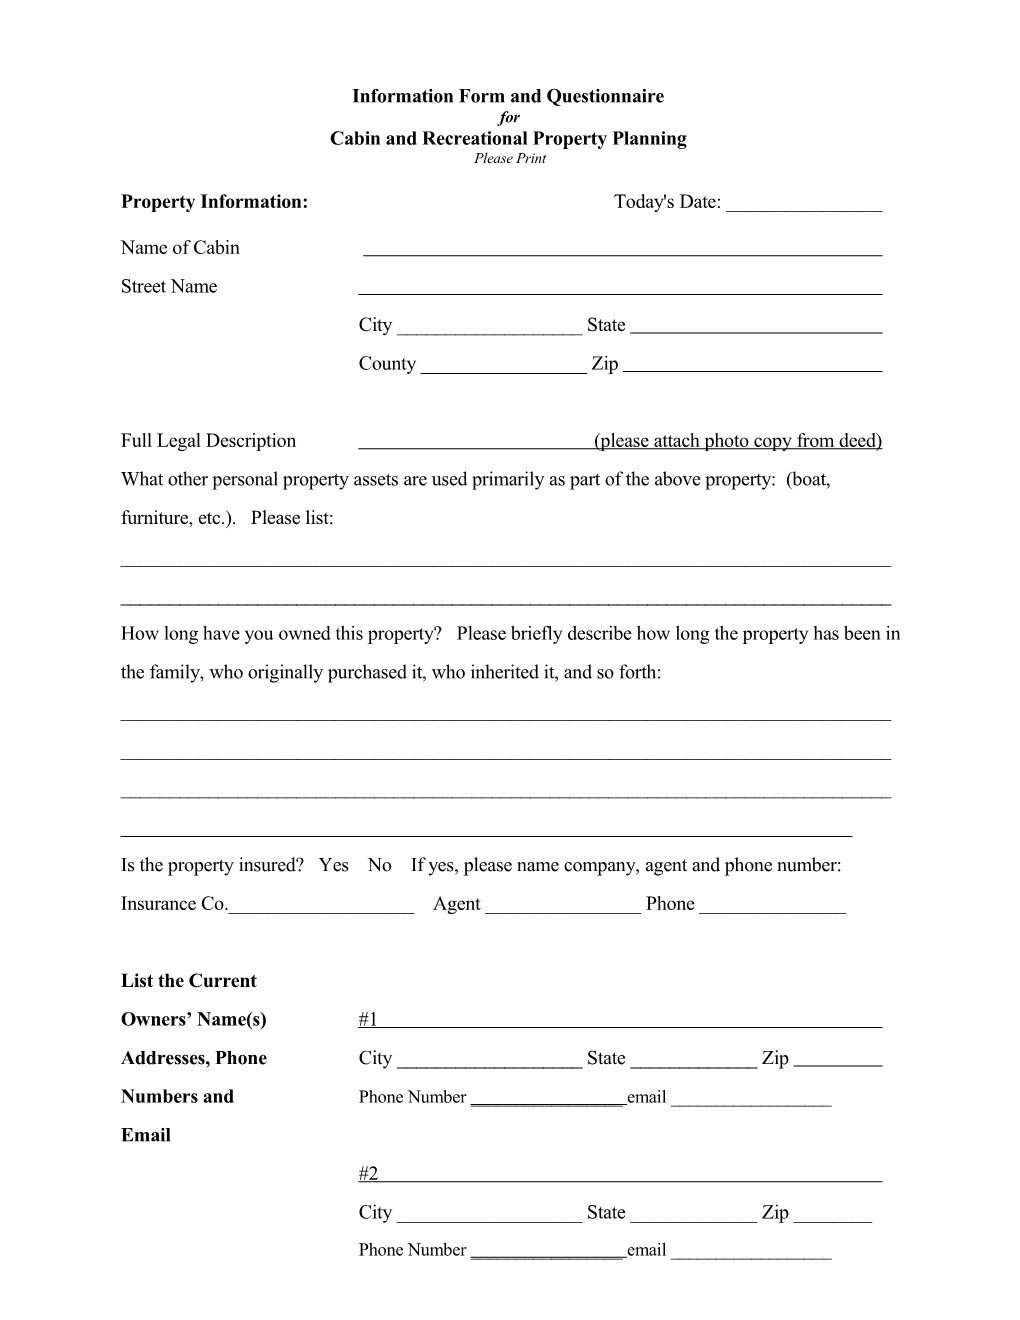 Revised Personal Information Form 7/23/98 Form